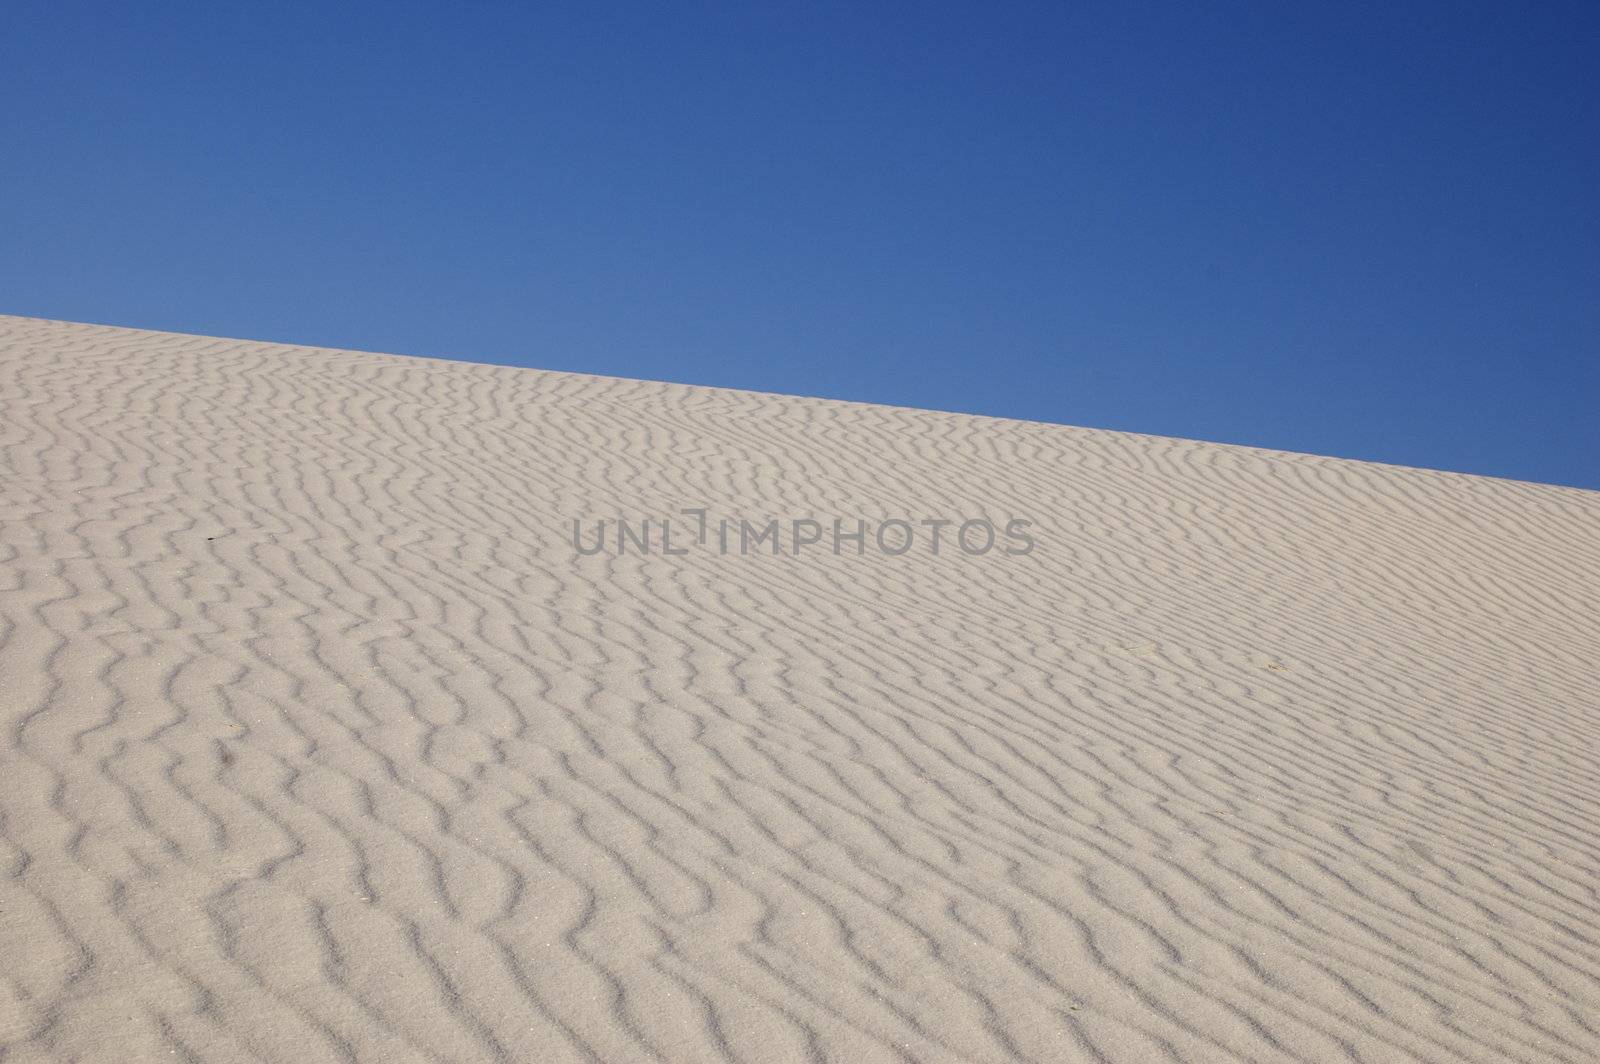 White Sands National Monument at sunset, featuring close up/ macro of diagonal rippled dune against a deep blue sky, New Mexico